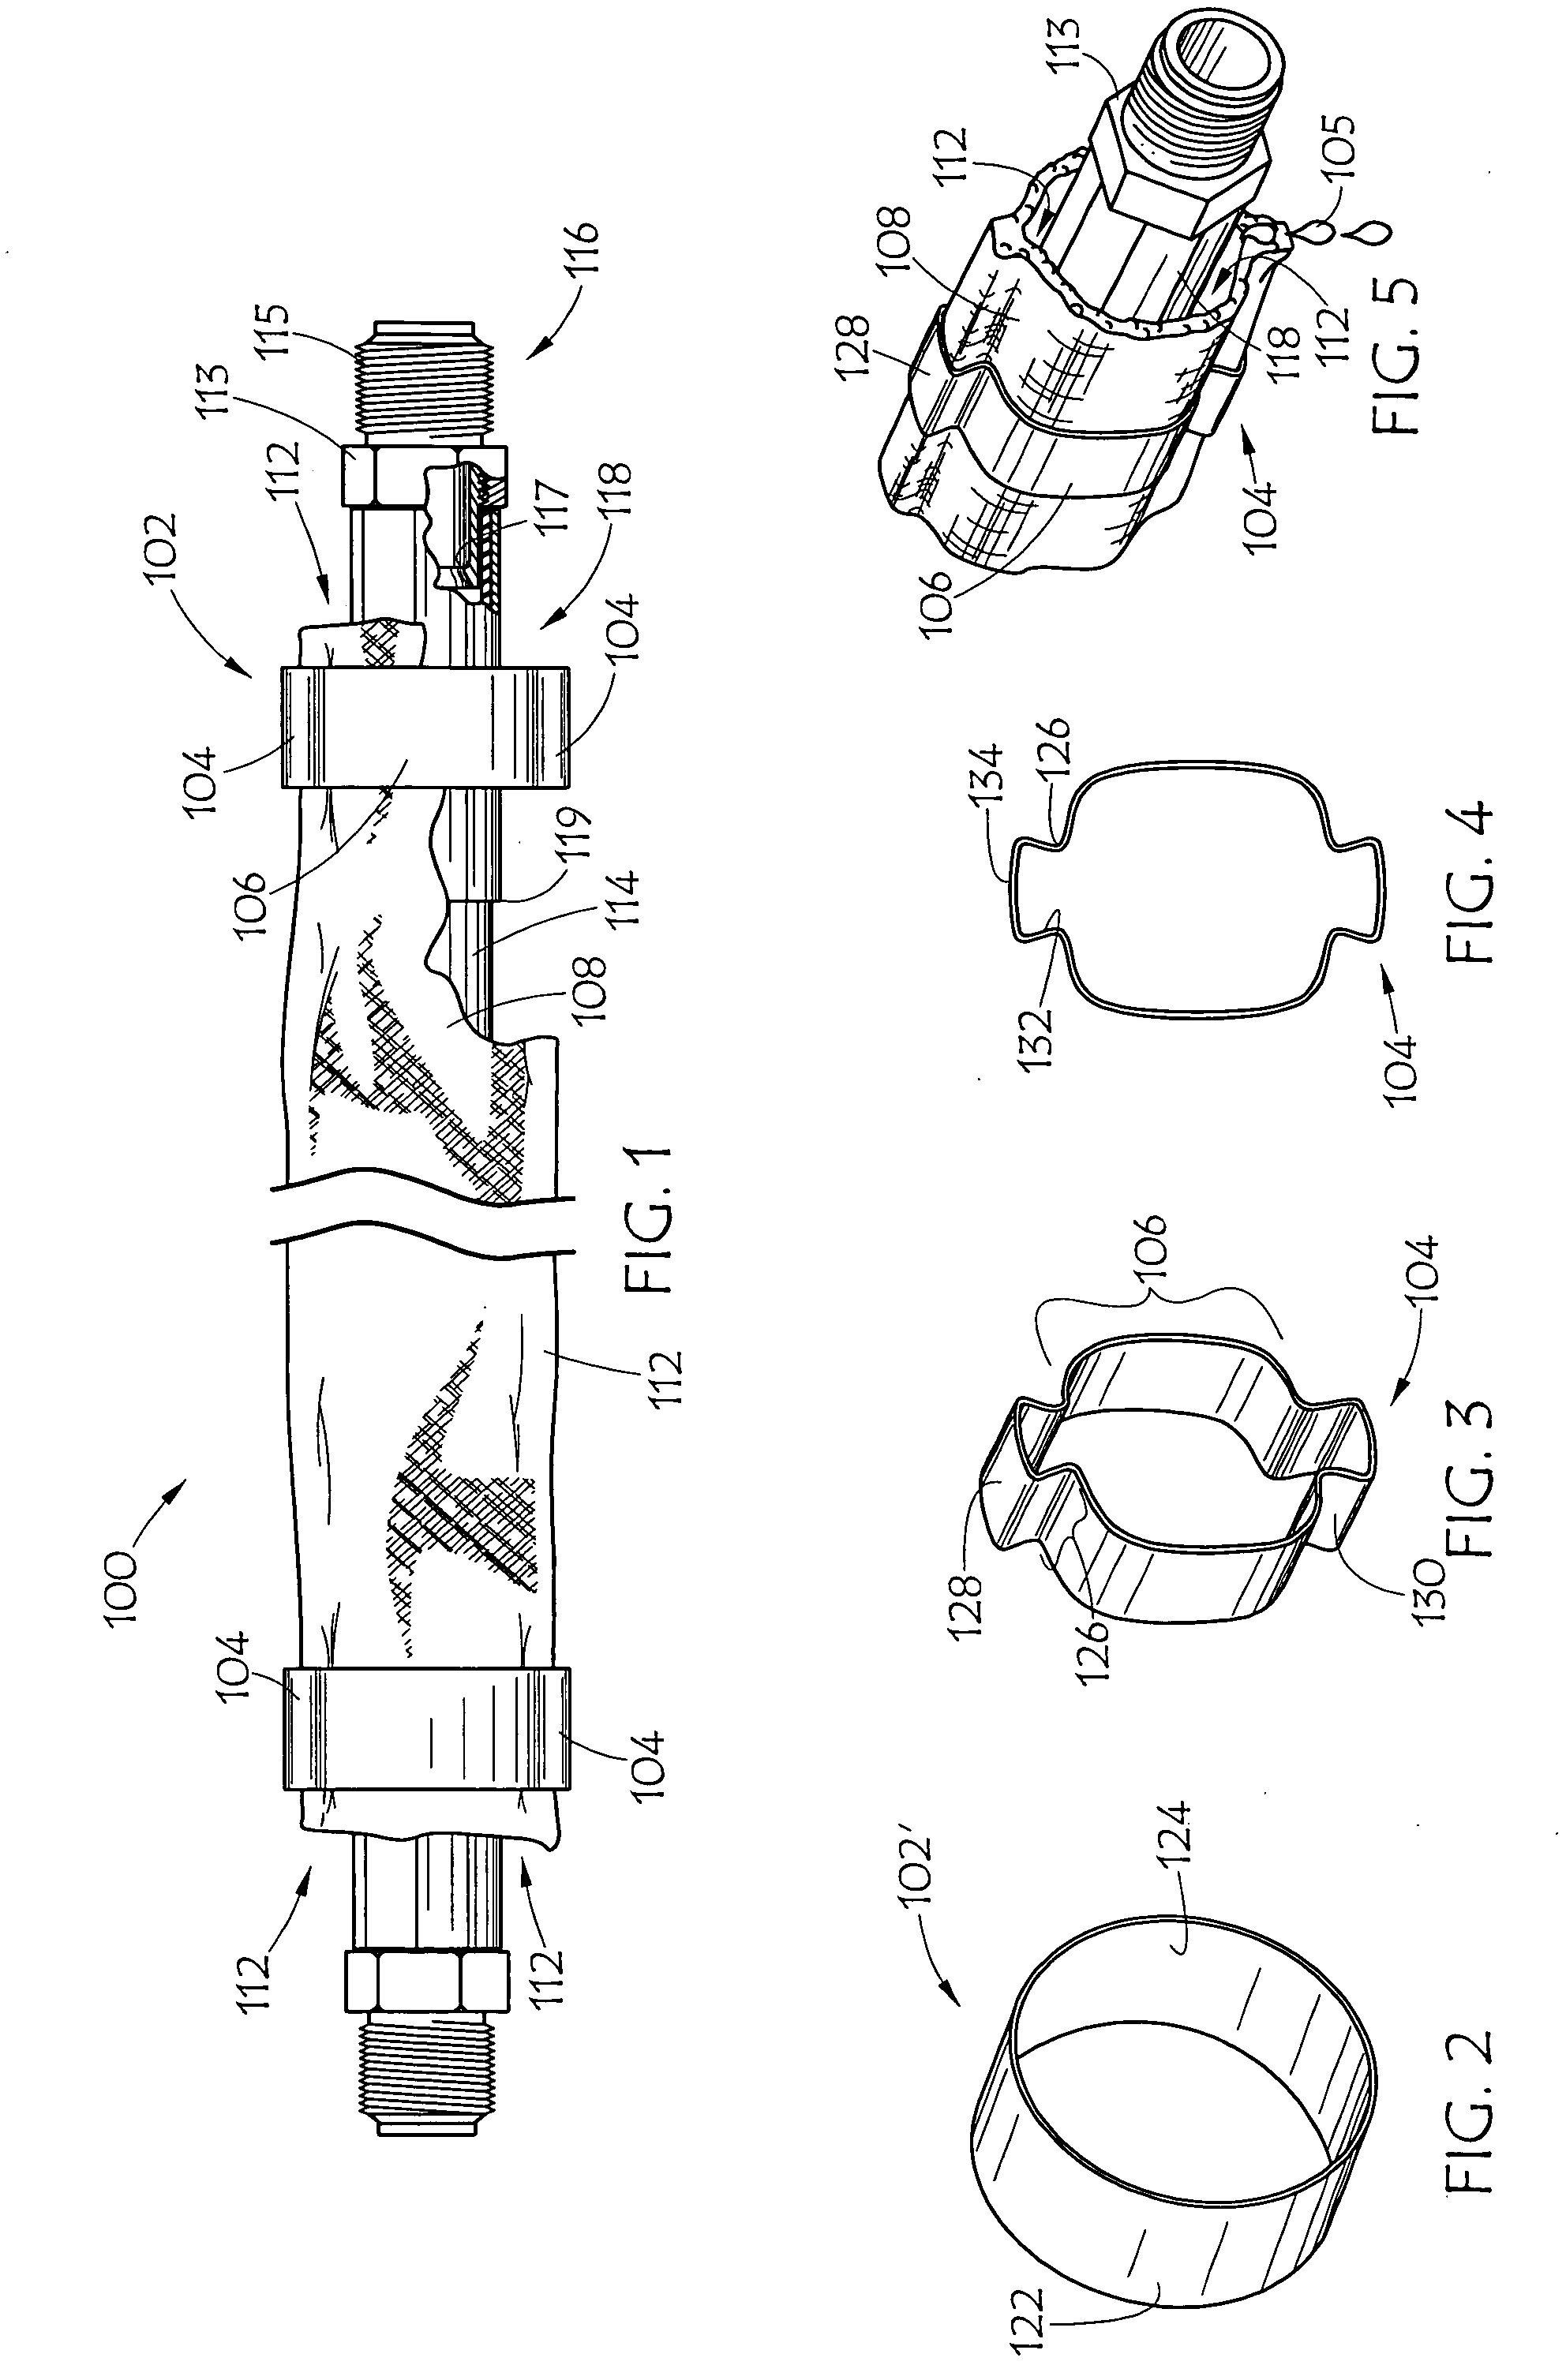 Safety and indicator apparatus systems and methods for high pressure conduits